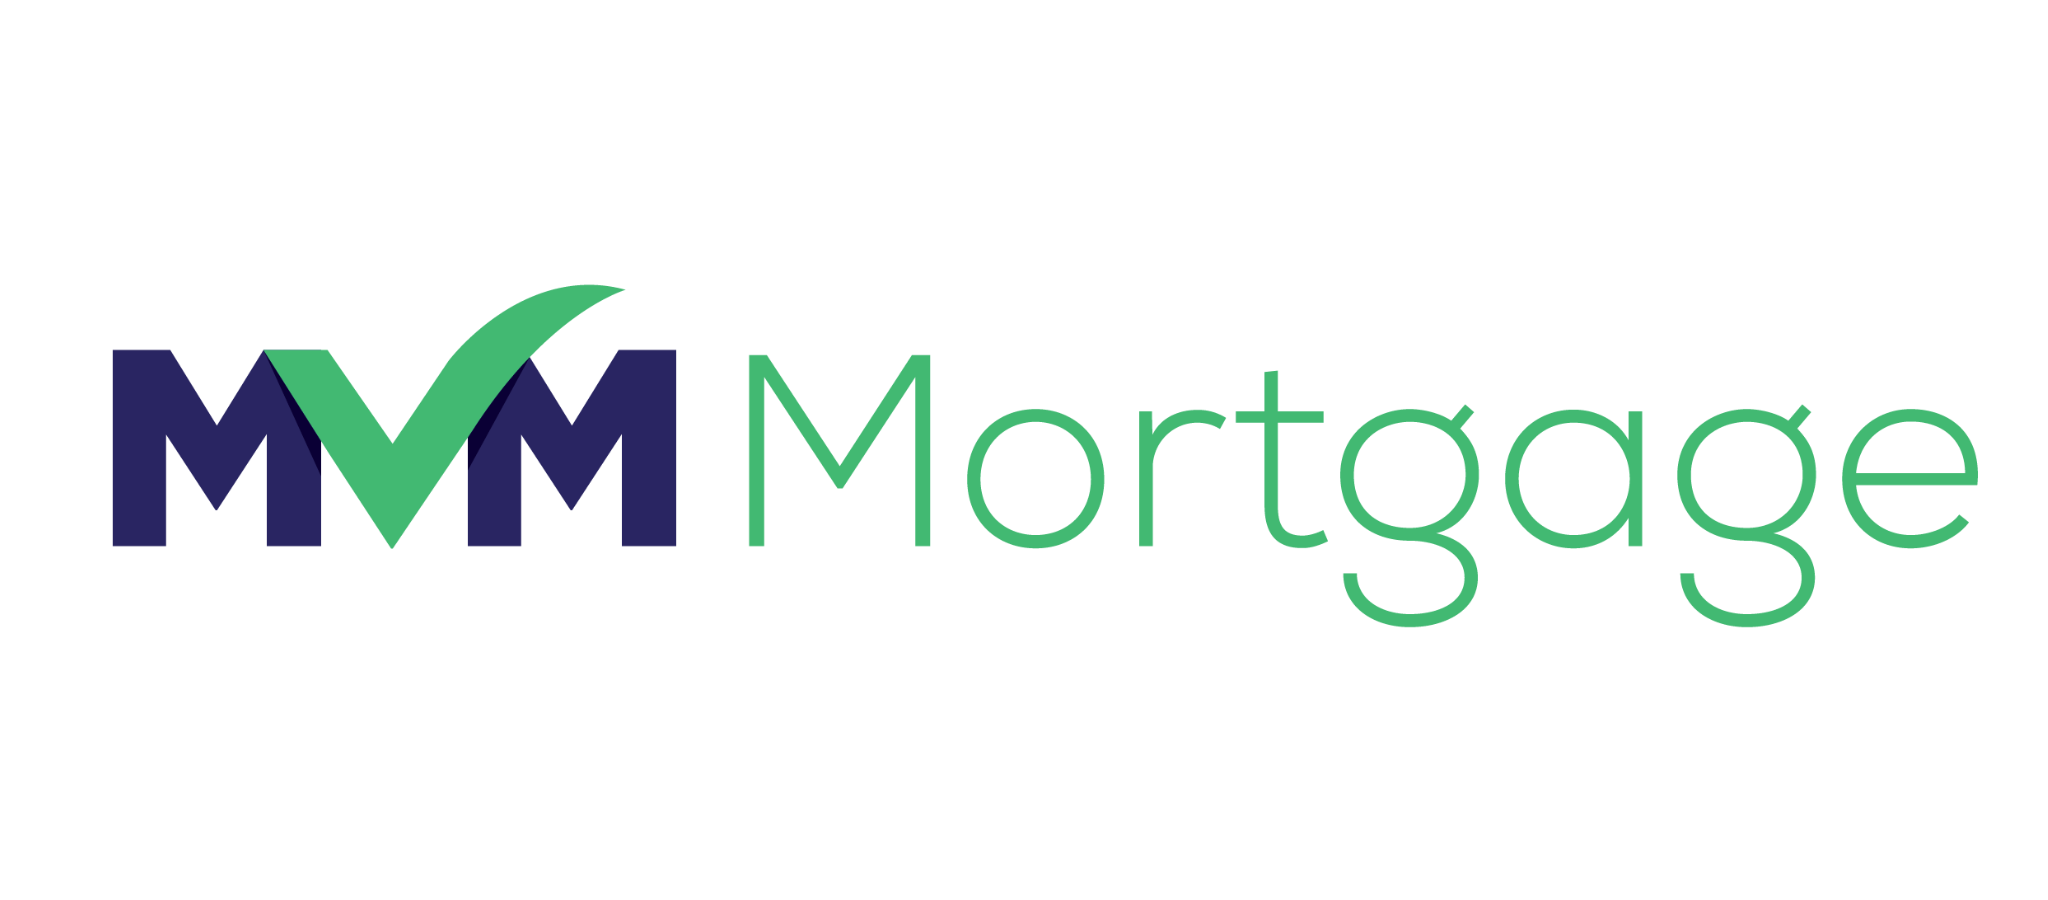 MVM MortgageAbout Us